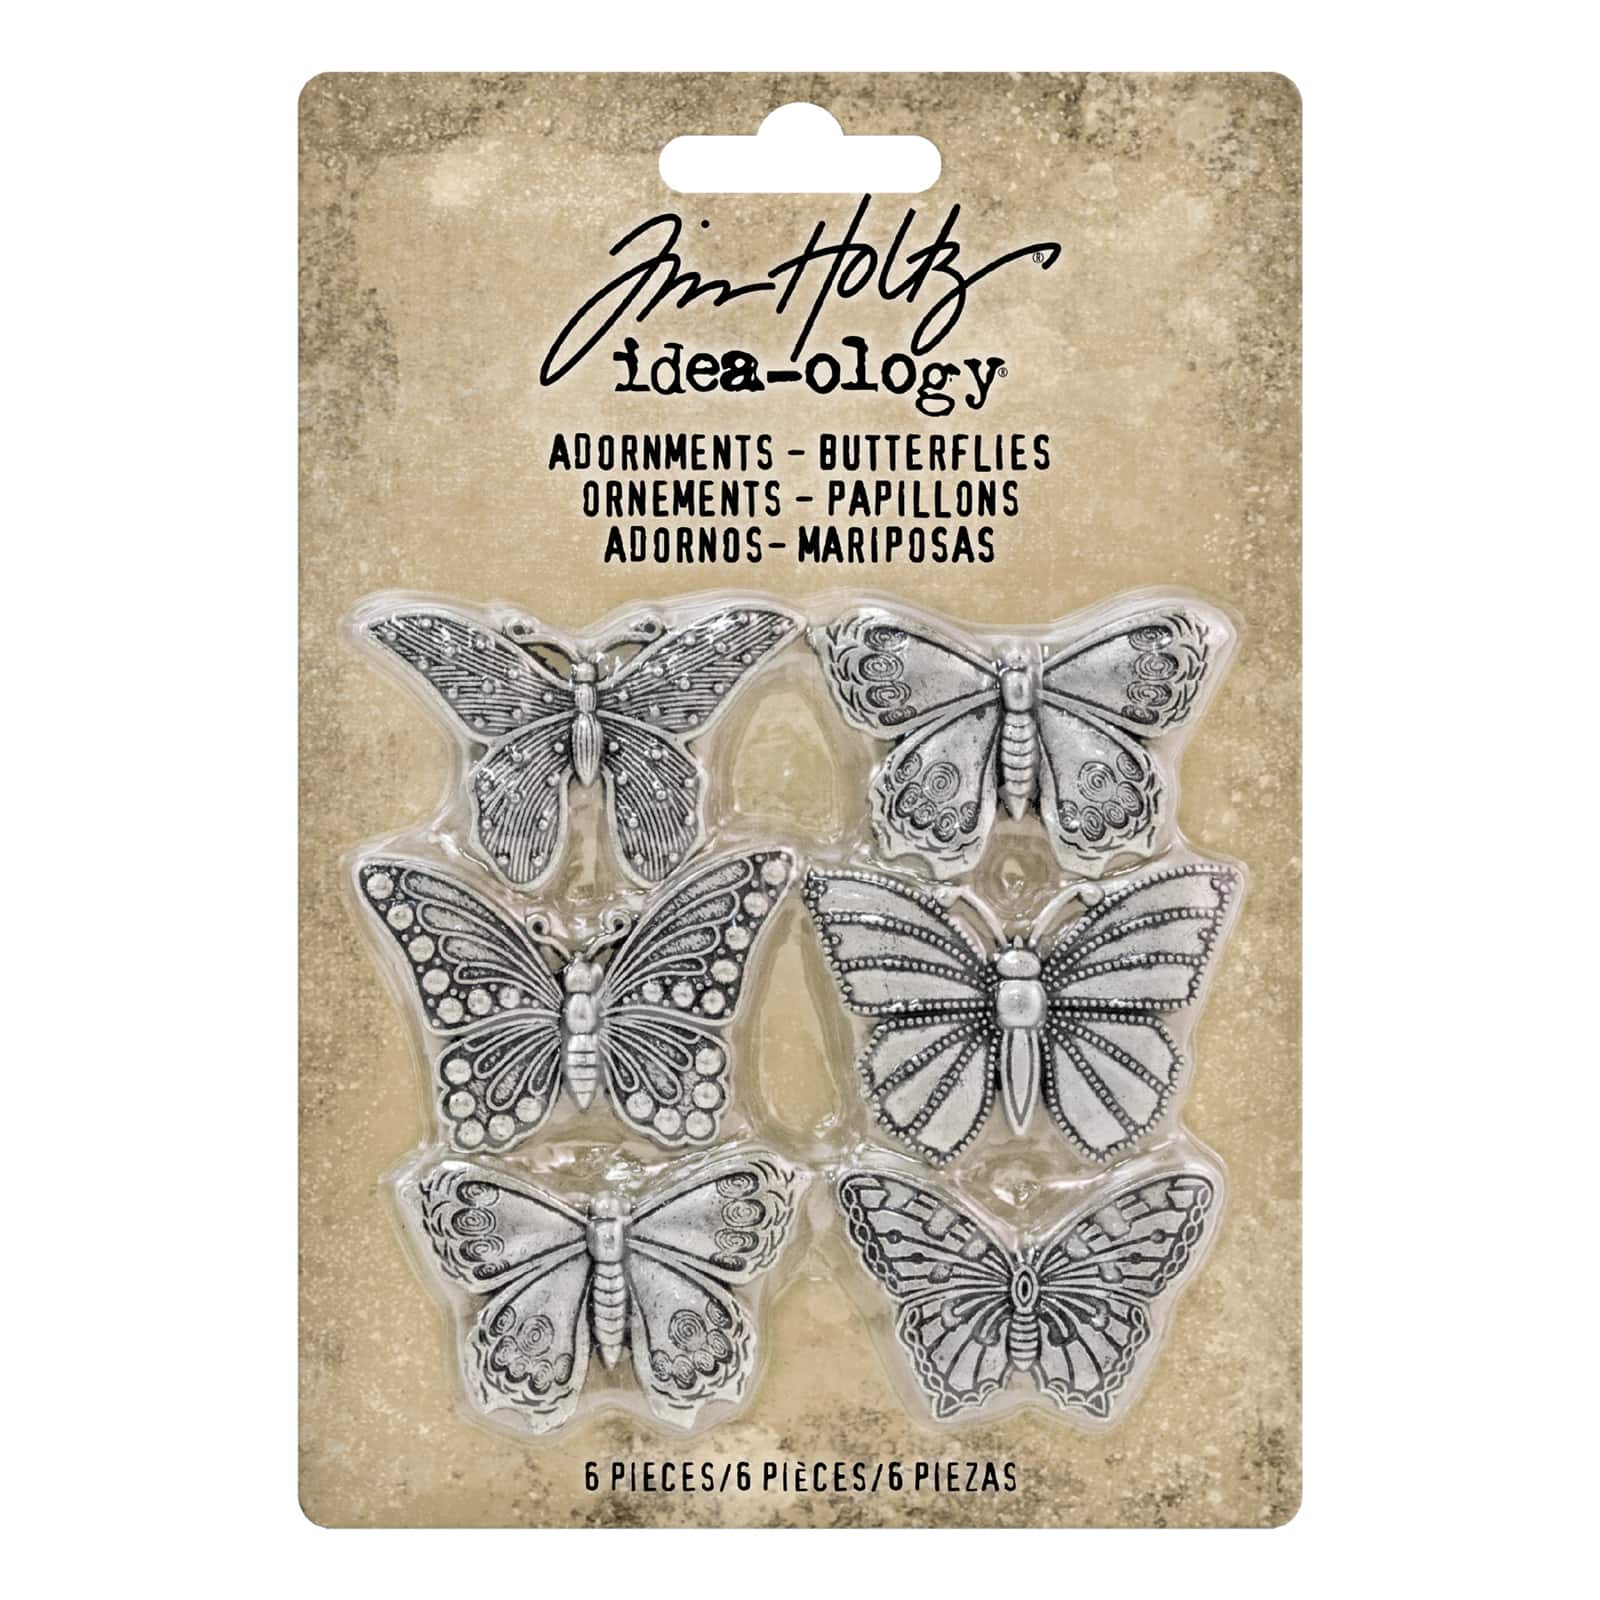 Shop for the Tim Holtz® Idea-Ology® Adornments, Butterfly at Michaels